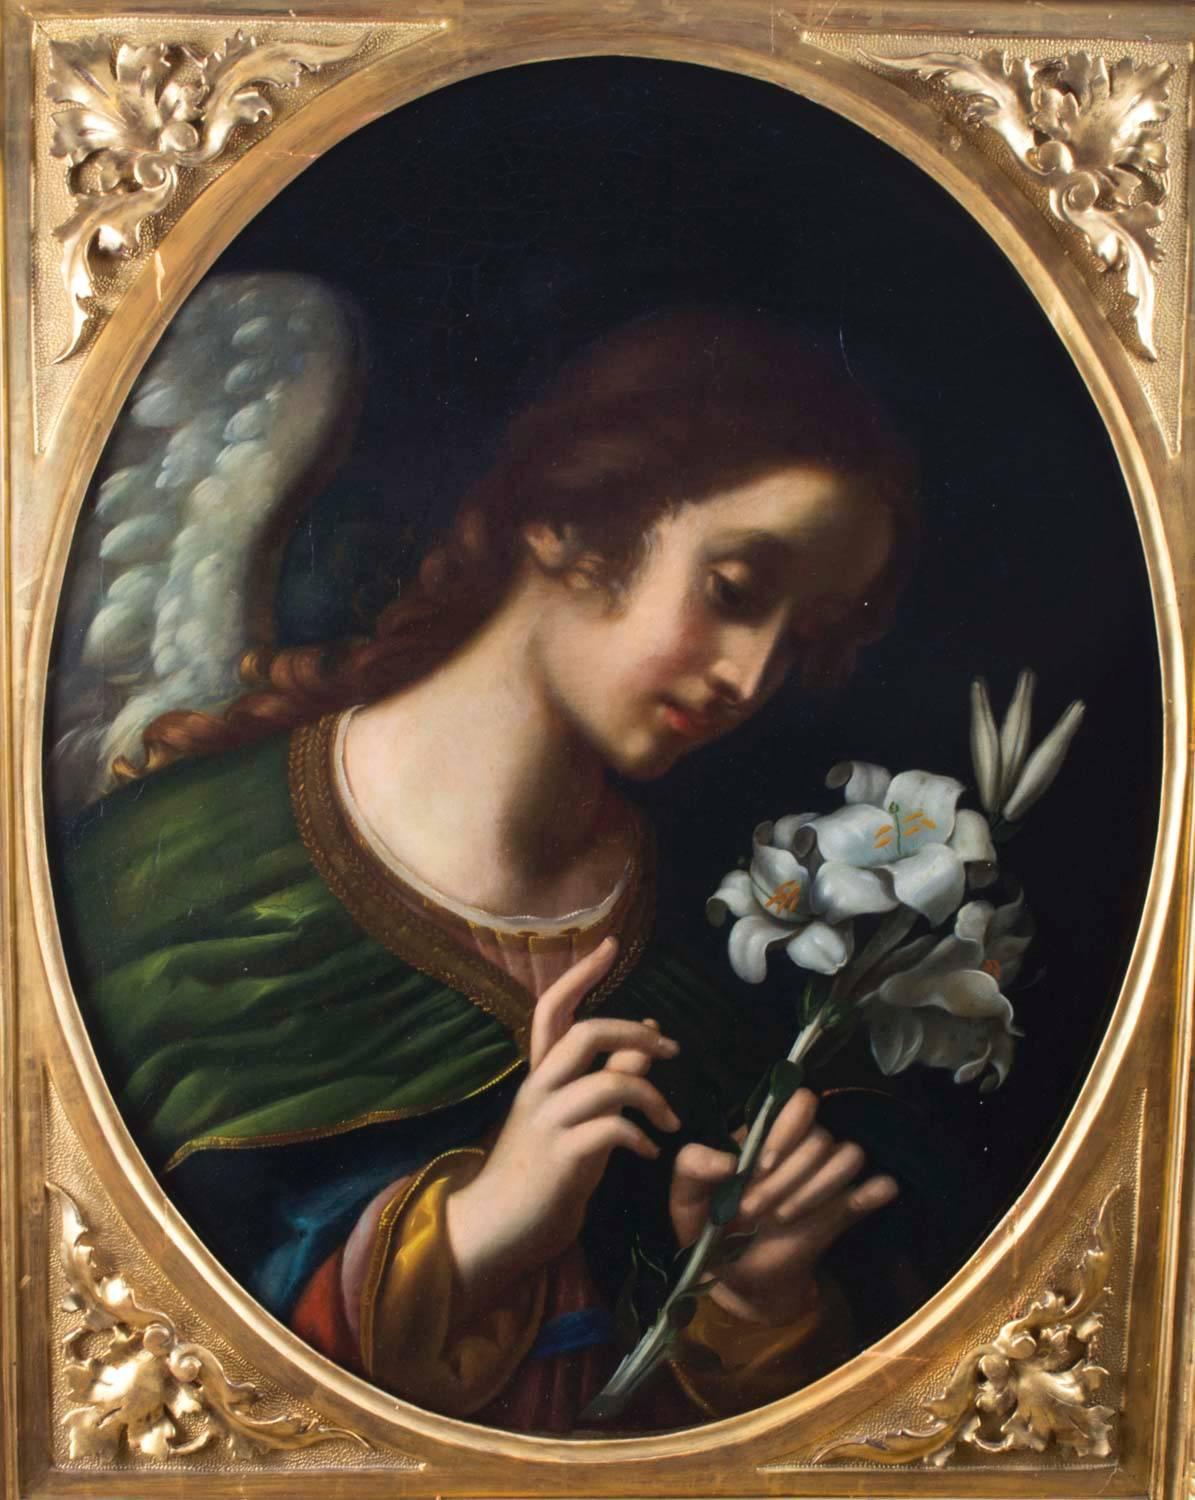 This is a beautiful oval oil on canvas depicting the Angel of the Annunciation, Italian School, circa 1860 in date, after the original by Carlo Dolci (1616-1686), in the Palazzo Pitti, Florence.

The painting is housed in an elegant giltwood